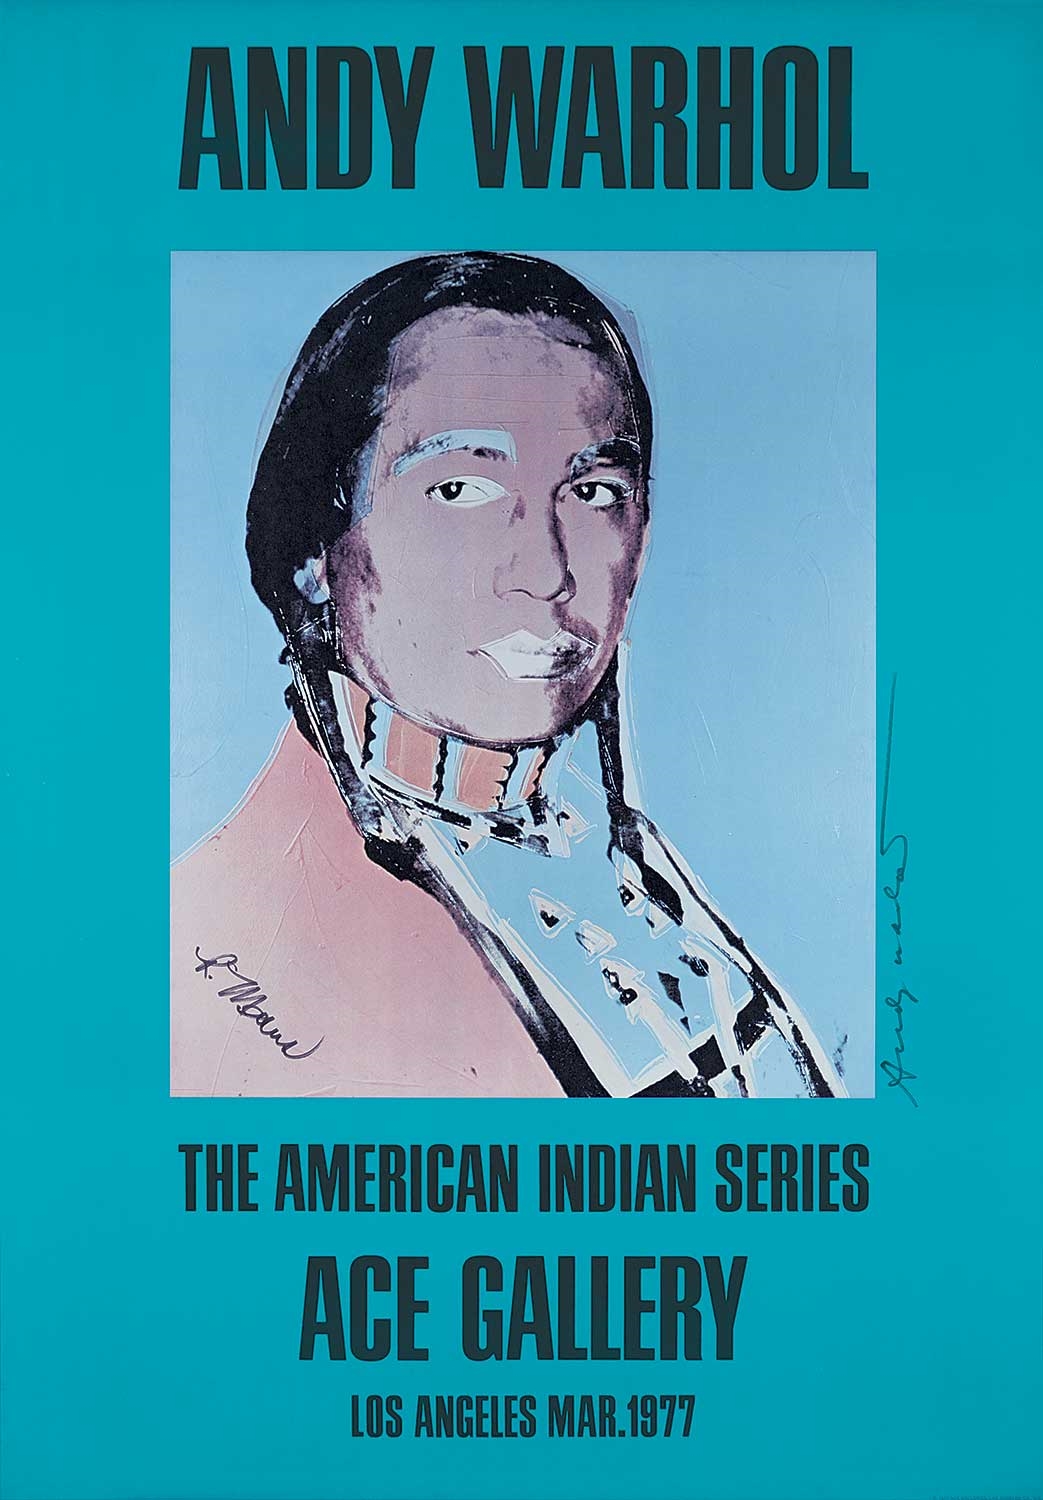 The American Indian Series, Ace Gallery, Los Angeles by Andy Warhol, 1977